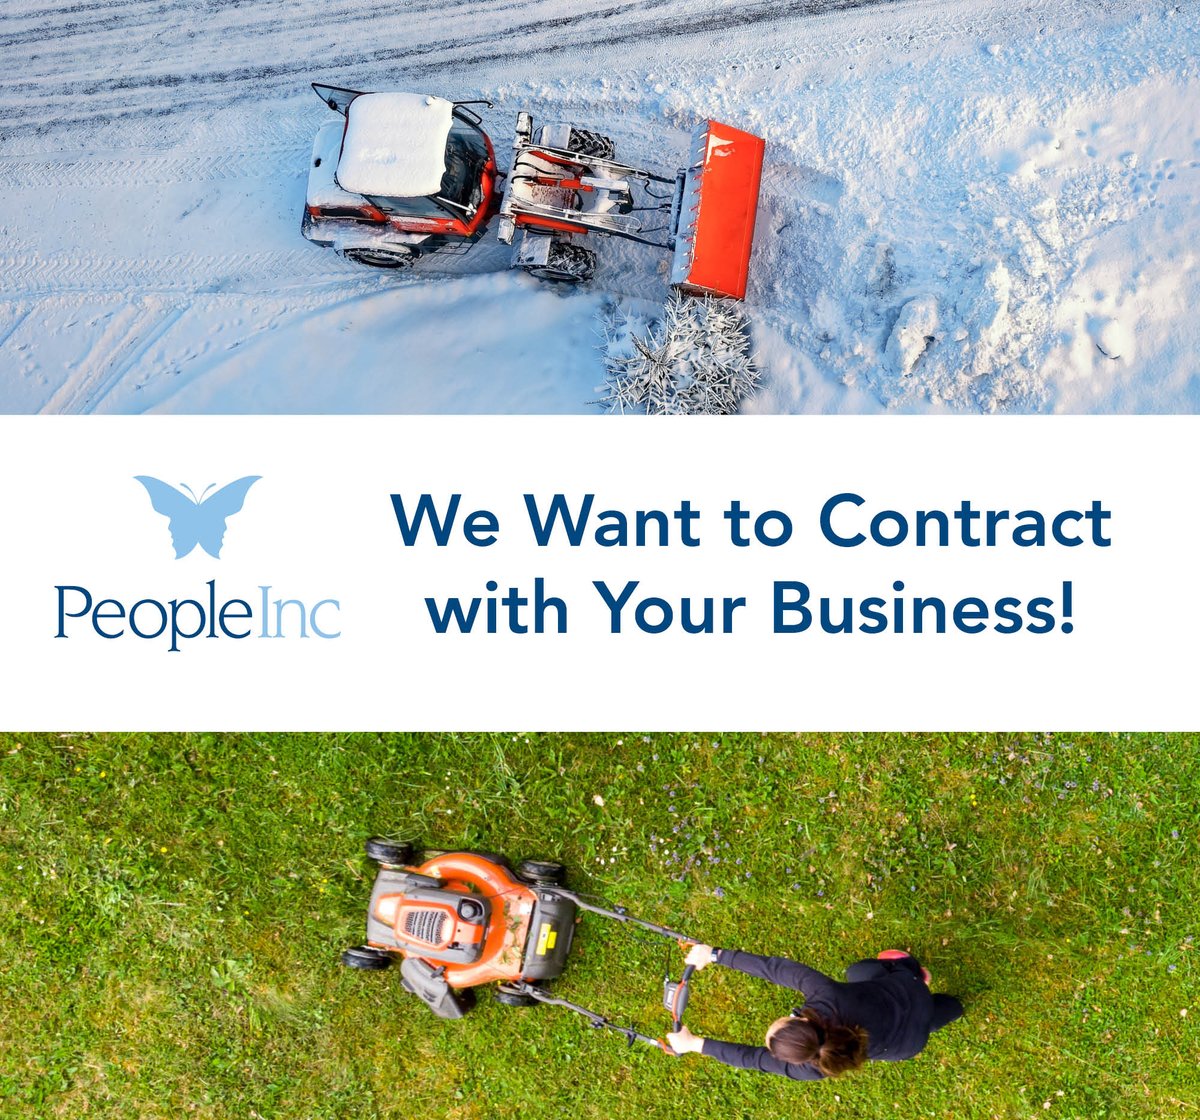 People Inc. is looking to contract with local companies for lawn care and snow removal in 2023/24! Women and minority-owned businesses are a plus! Interested vendors can contact William Gajewski at william.gajewski@people-inc.org.

#lawncare #snowremoval #businessconnections